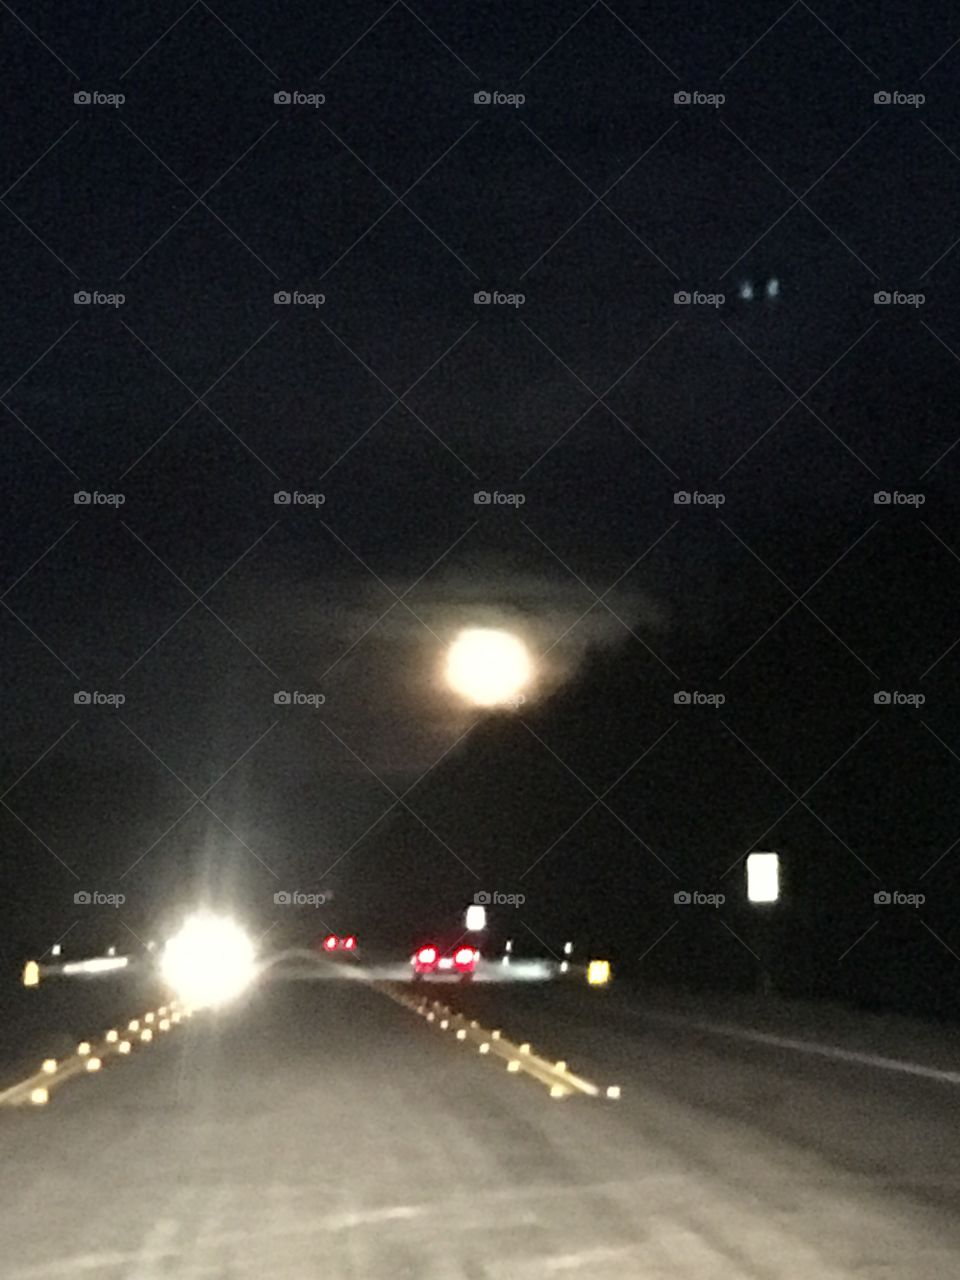 The moon at the end of the road